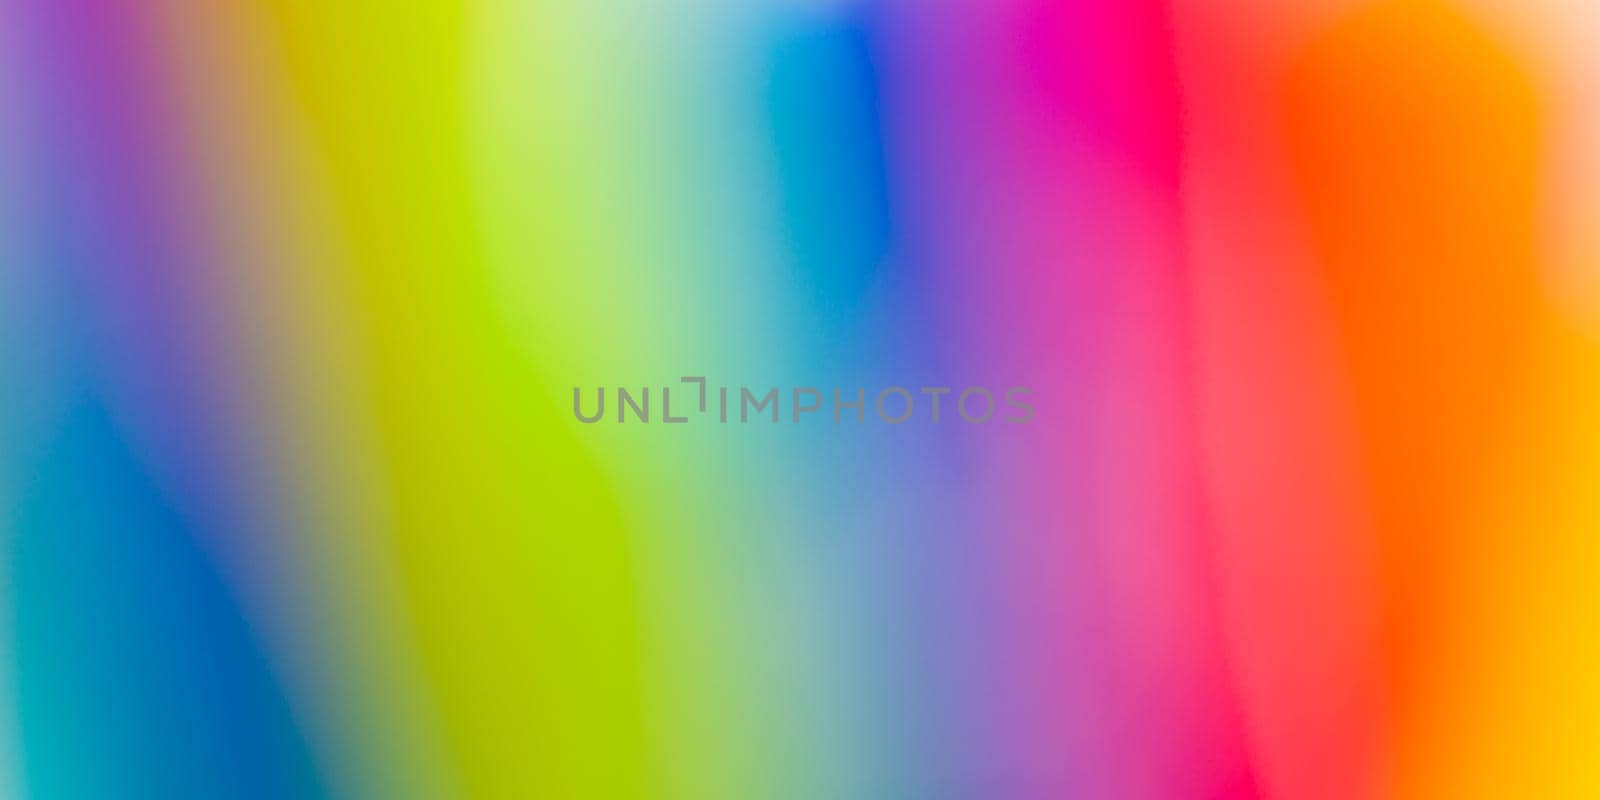 Blurred and colorful abstract gradient background by dutourdumonde